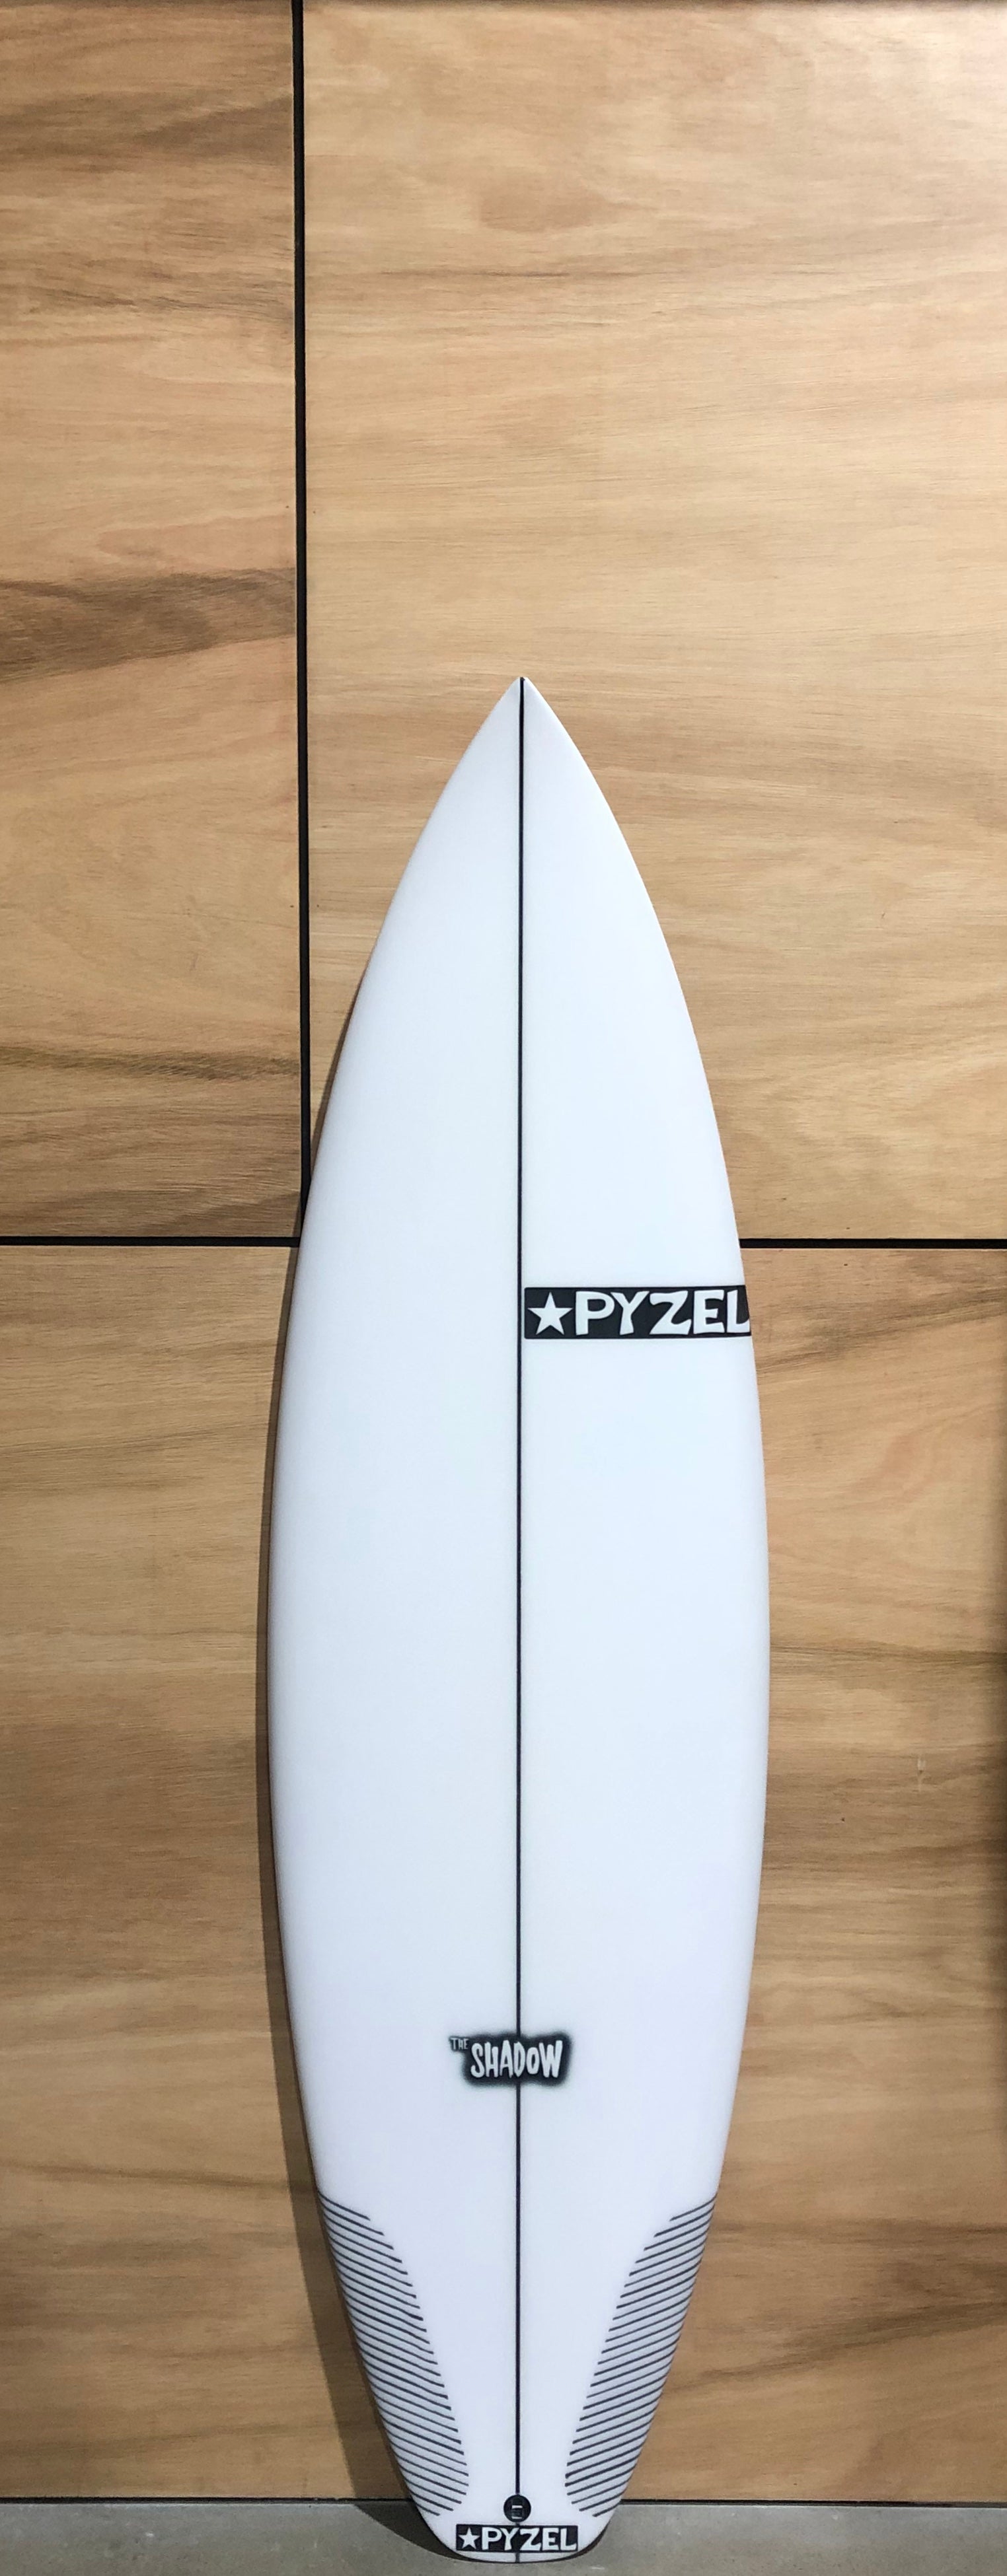 Pyzel The Shadow - Board Store PyzelSurfboard  